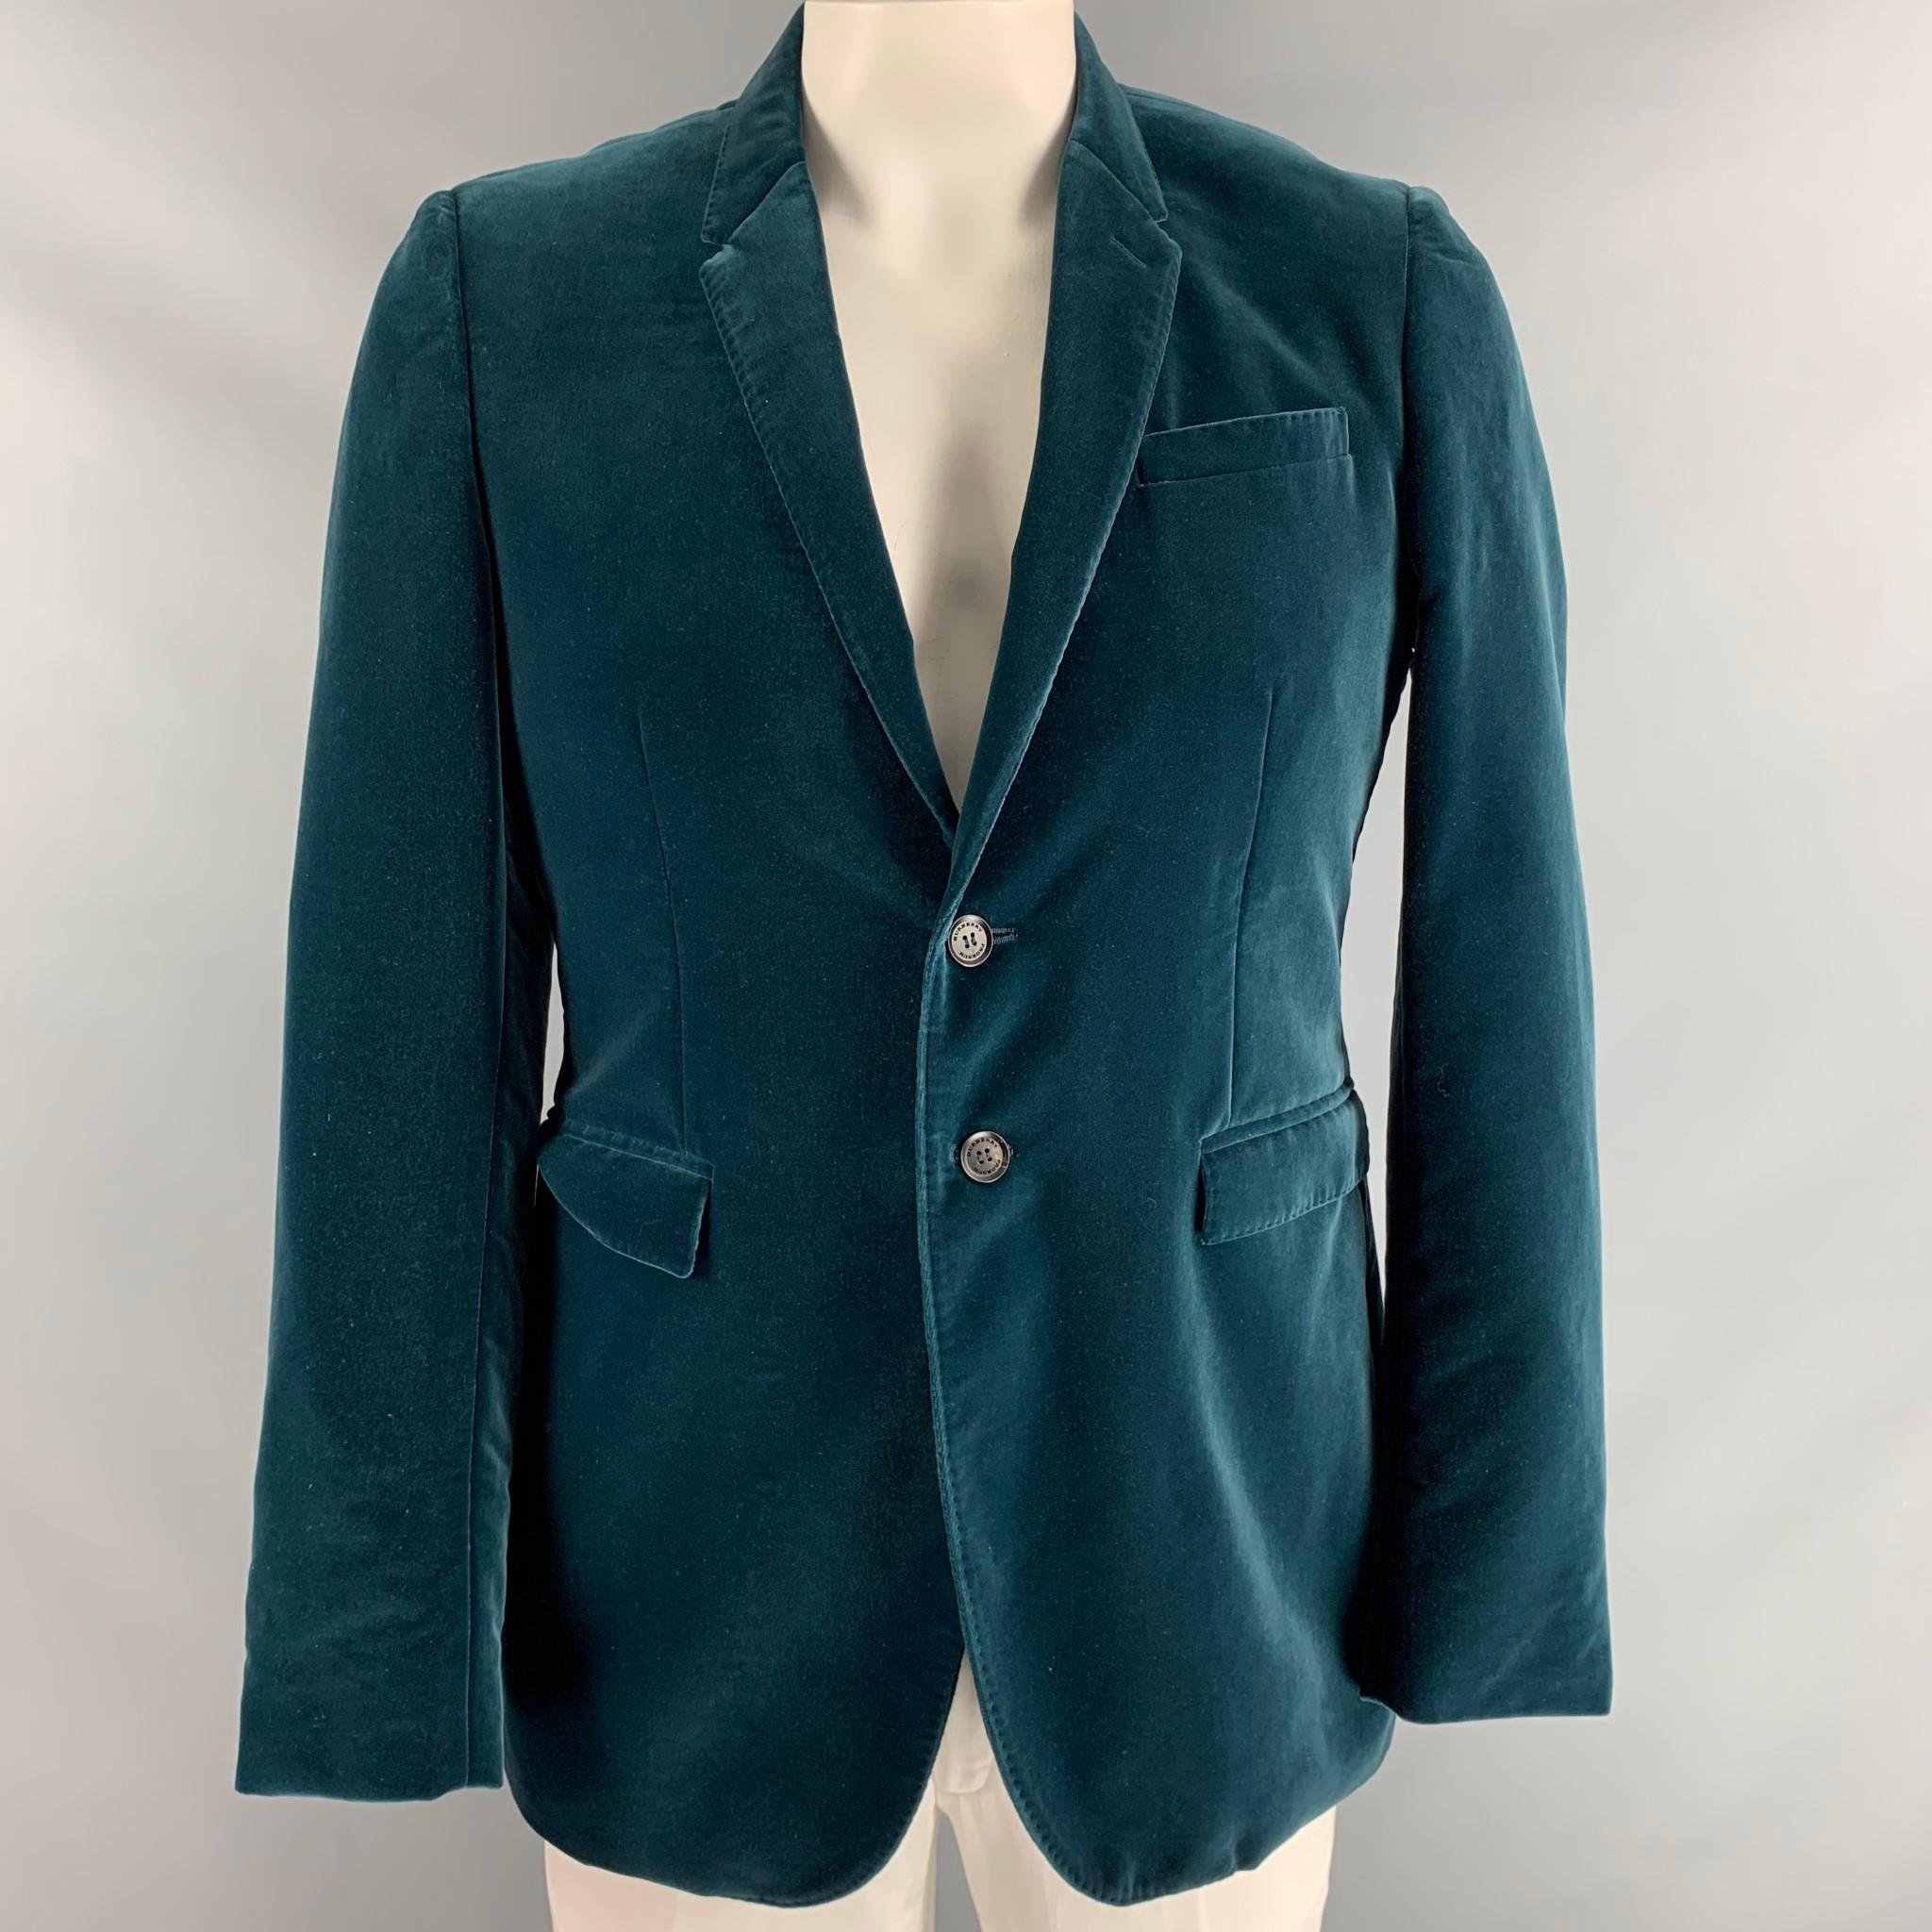 BURBERRY PRORSUM sport coat, fully lined comes in blue velvet featuring two button closure, flap pockets and notch lapel. Made in Italy.

Excellent Pre-Owned Condition.
Marked: 52

Measurements:

Shoulder: 17 in
Chest: 42 in
Sleeve: 27 in
Length: 